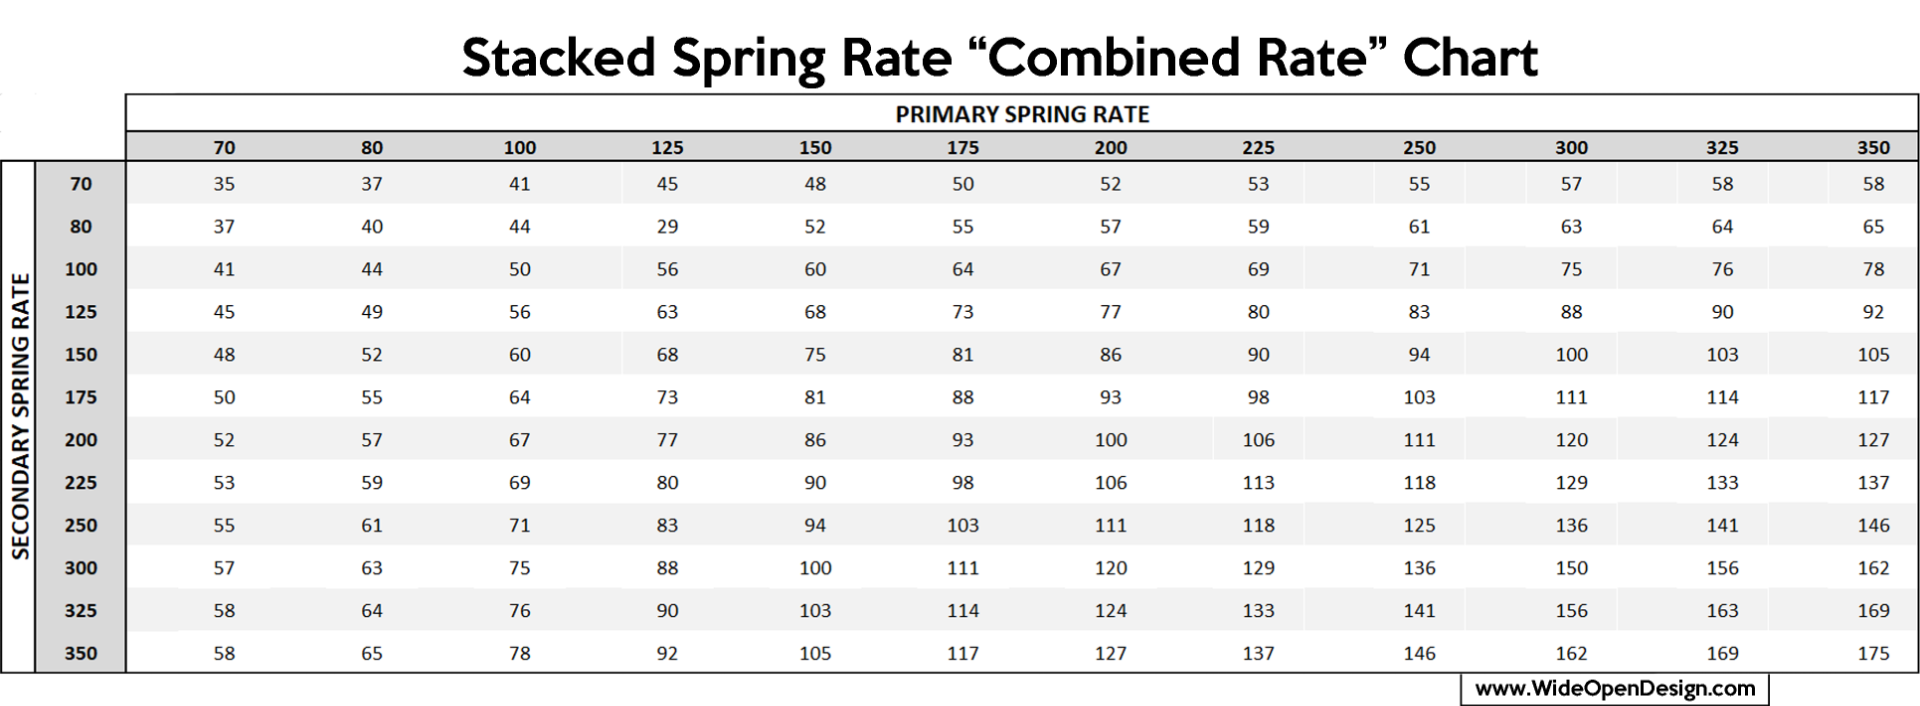 Stacked Spring Rate "Combined Rate" Chart for 14 Inch Shocks